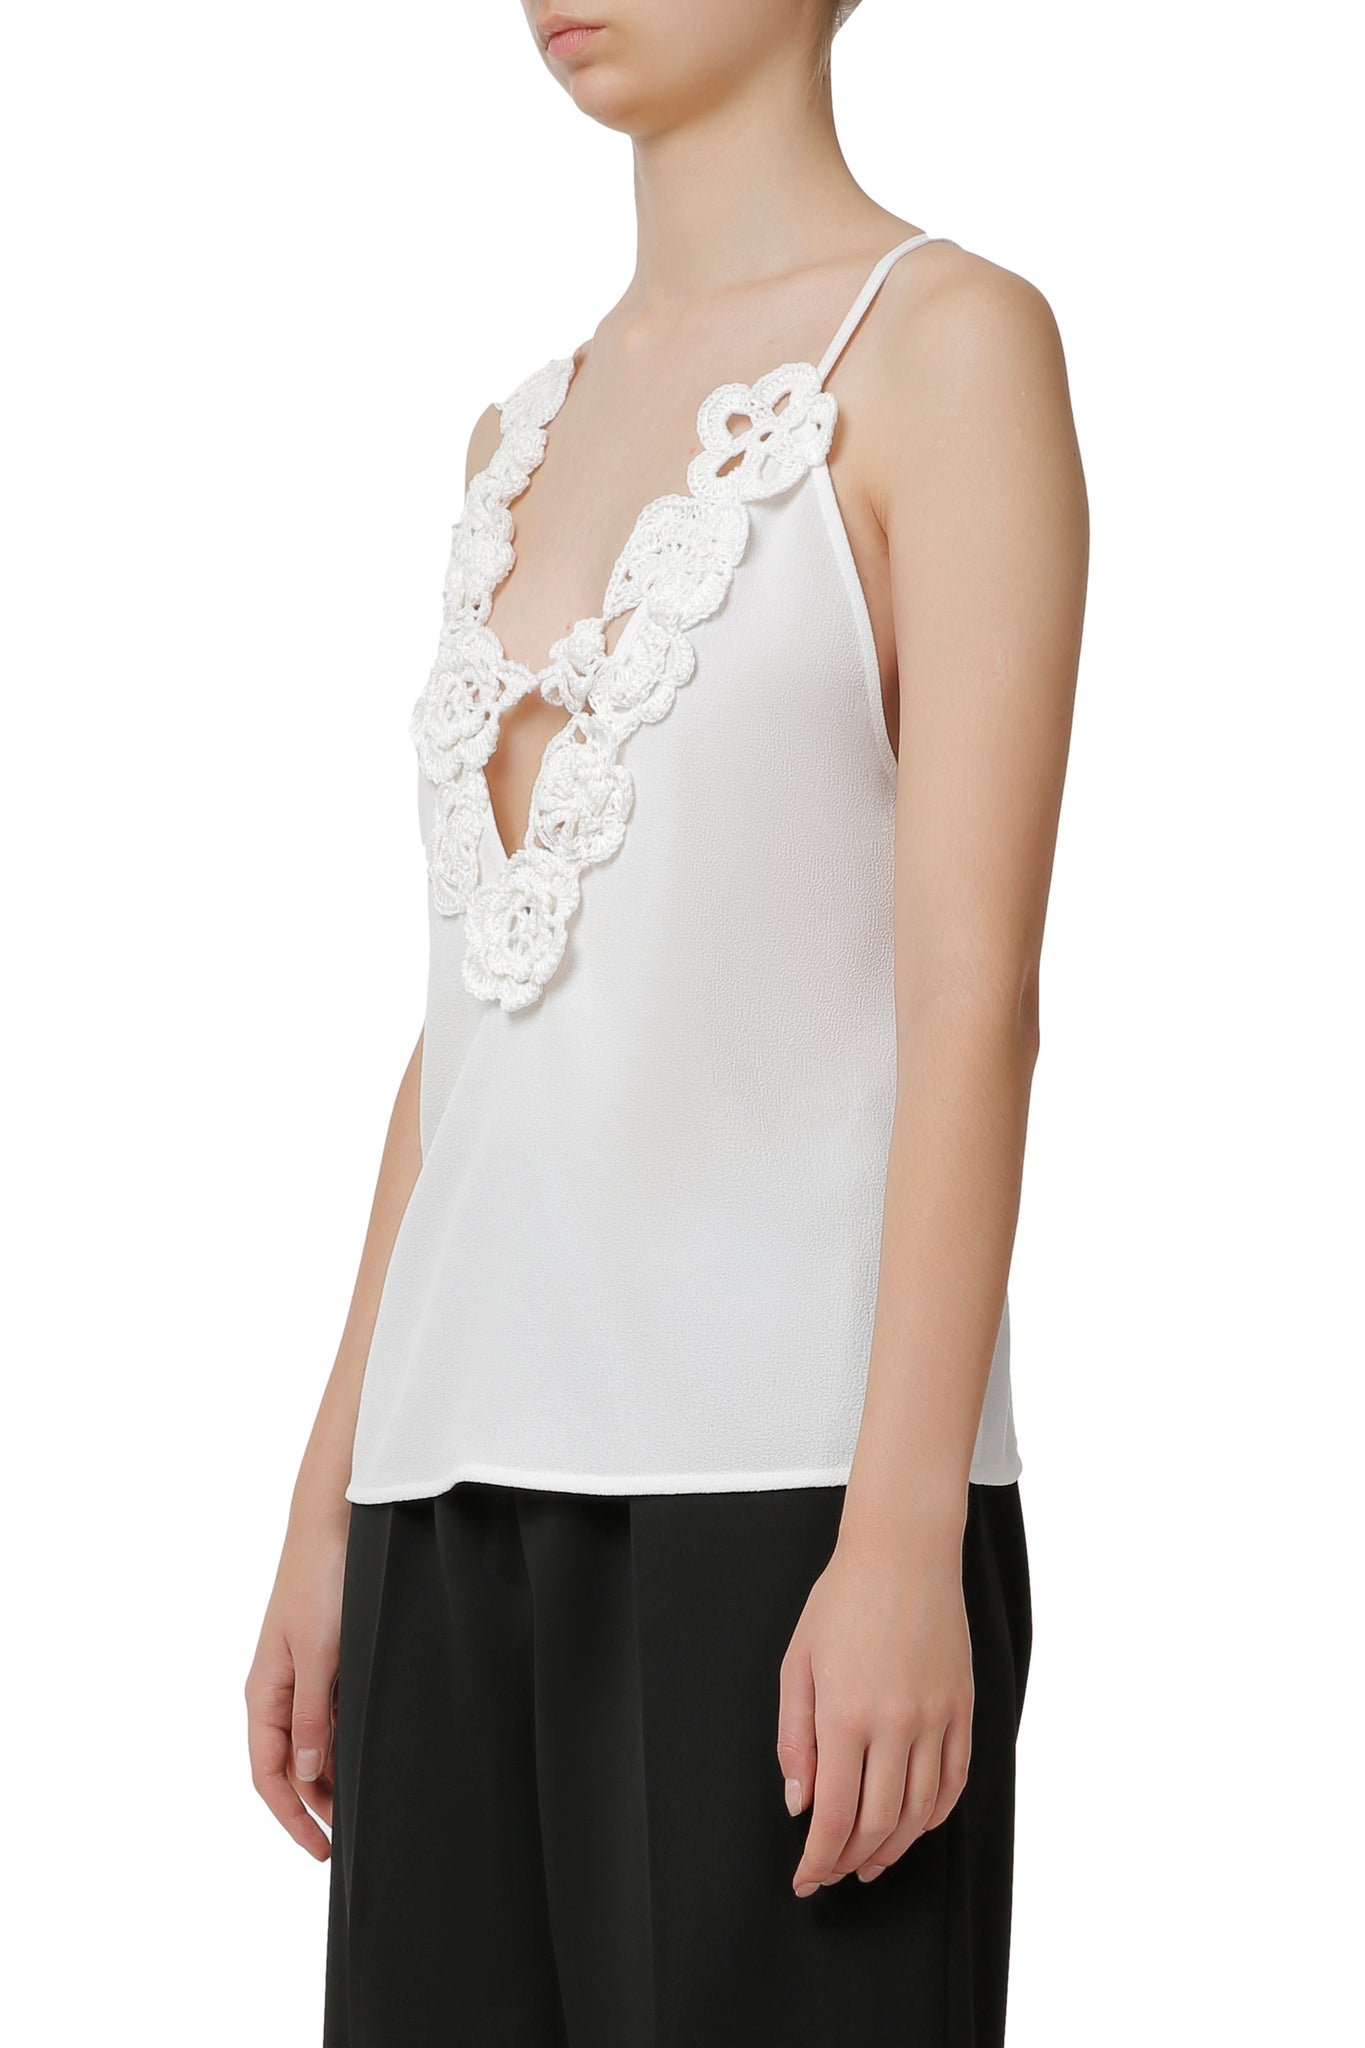 White top  with hand-knit details